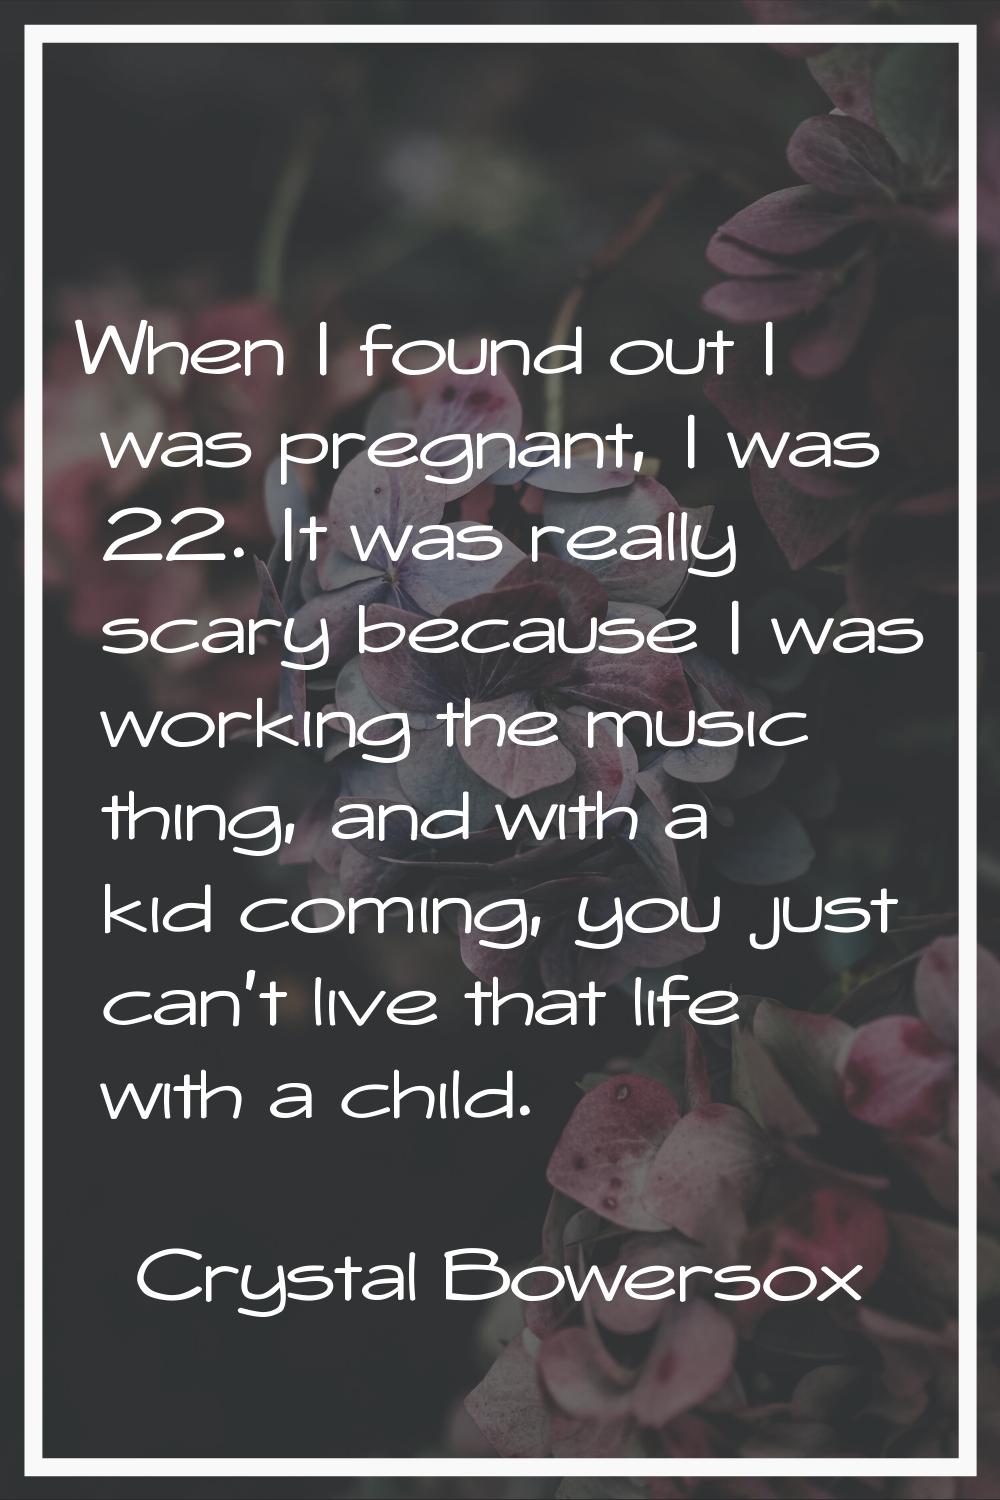 When I found out I was pregnant, I was 22. It was really scary because I was working the music thin